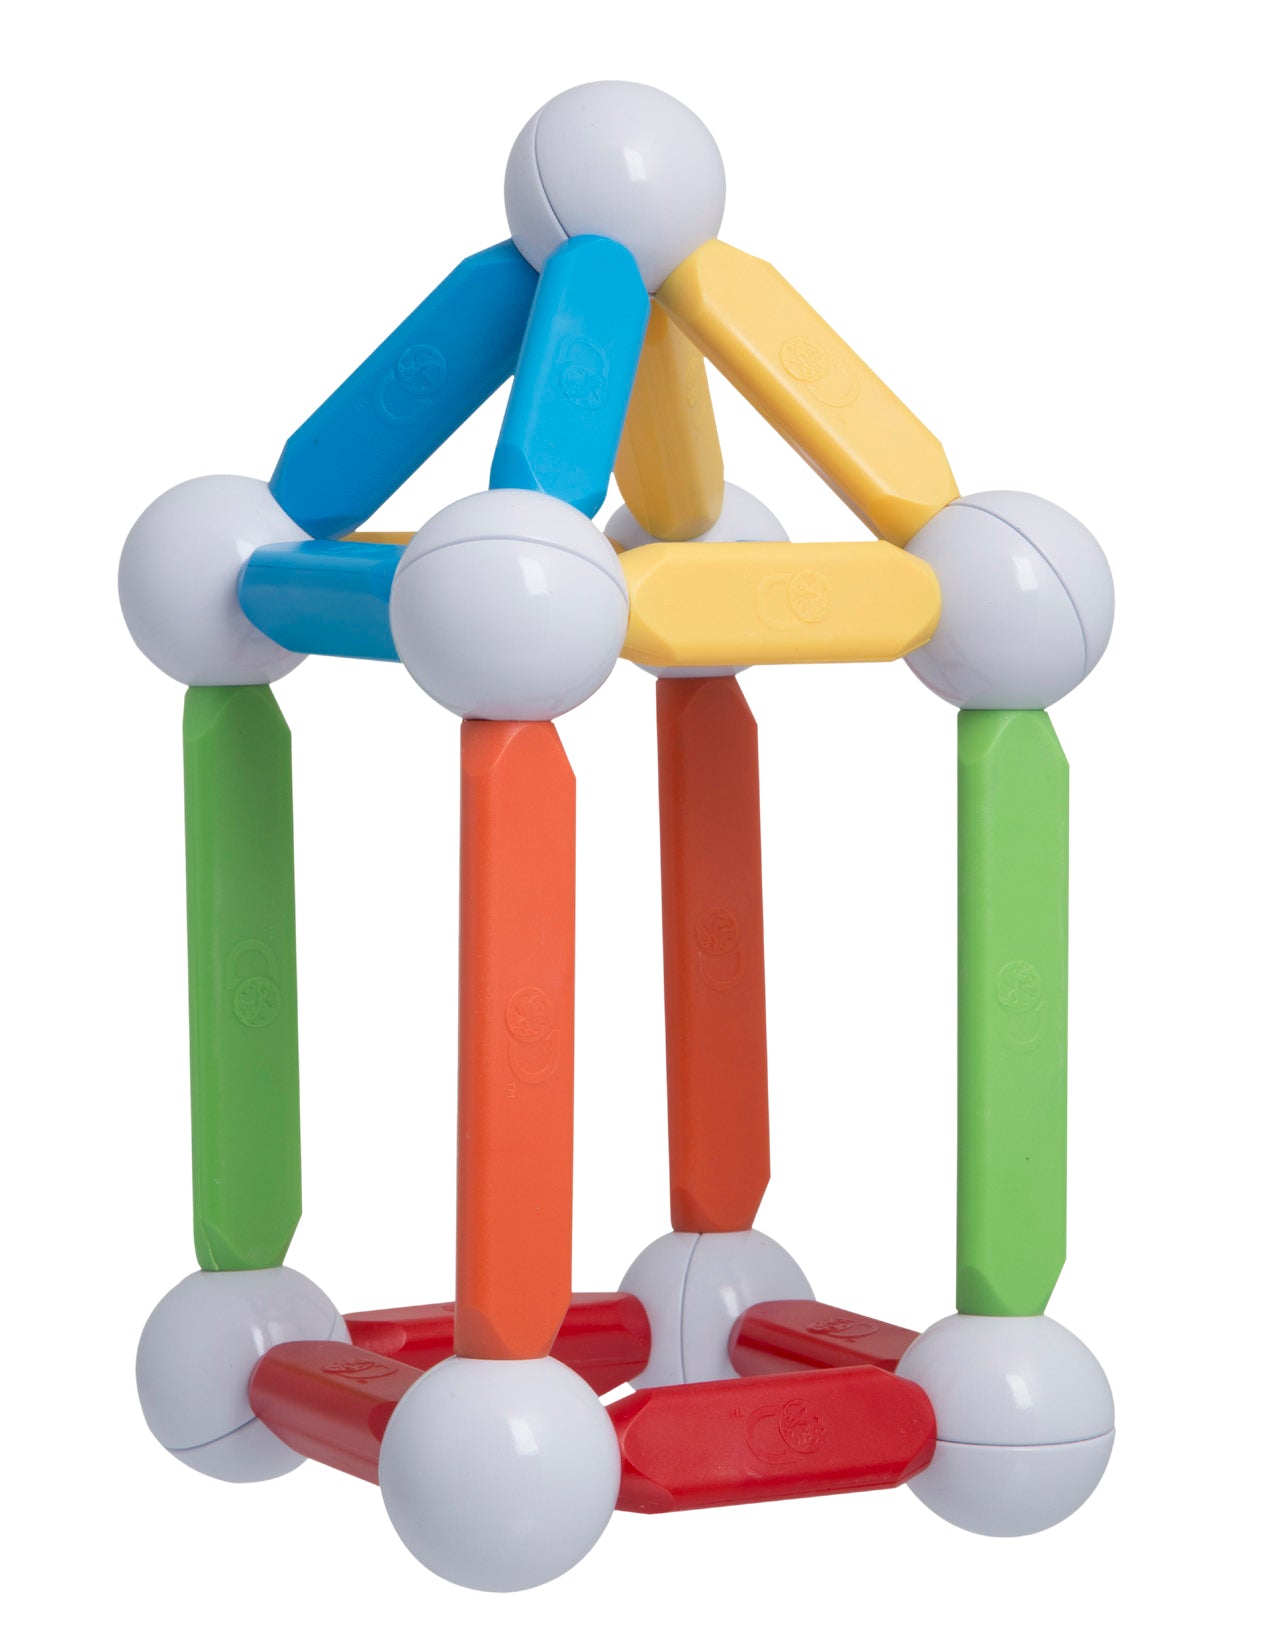 Discovery Mindblown STEM Magnetic Building Blocks